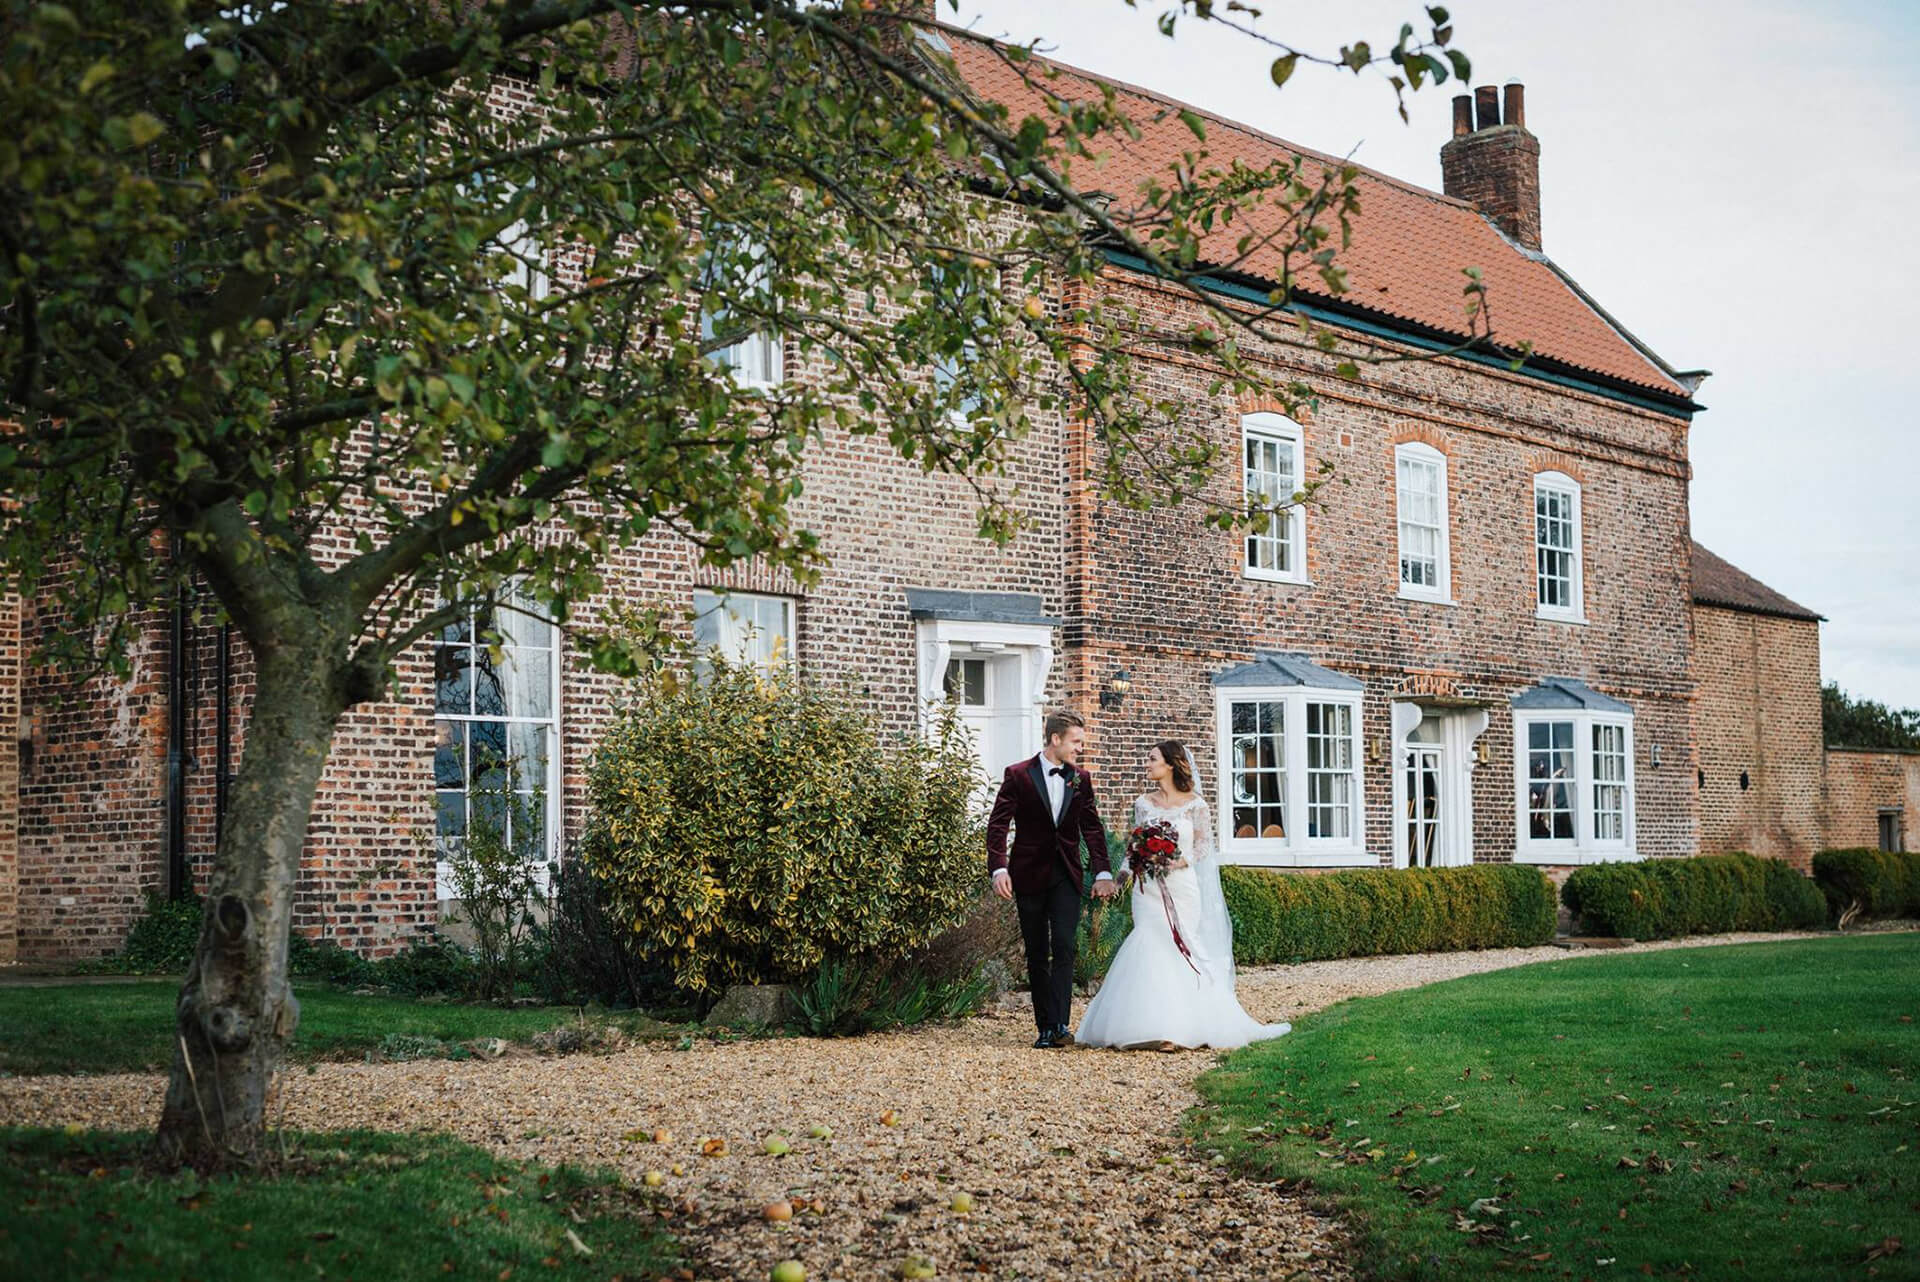 The wonderful Jade and Josh taking a stroll around the grounds. This moment was captured by <a href="http://www.sugarbirdphoto.co.uk/" target="_blank">Sugarbird Photography</a>